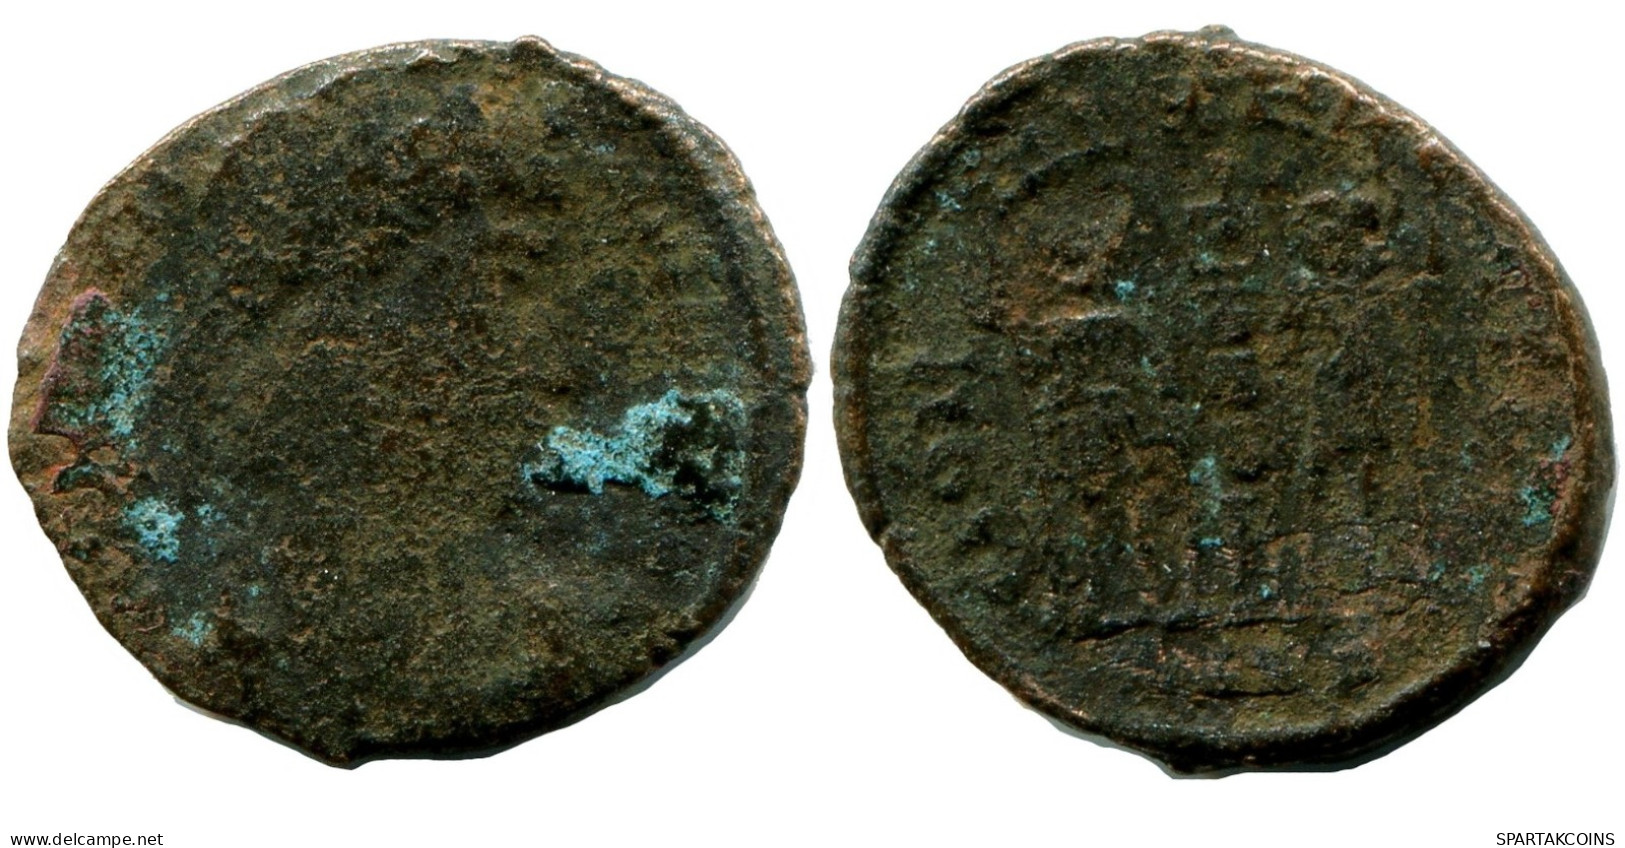 ROMAN Coin MINTED IN CYZICUS FROM THE ROYAL ONTARIO MUSEUM #ANC11042.14.D.A - The Christian Empire (307 AD To 363 AD)